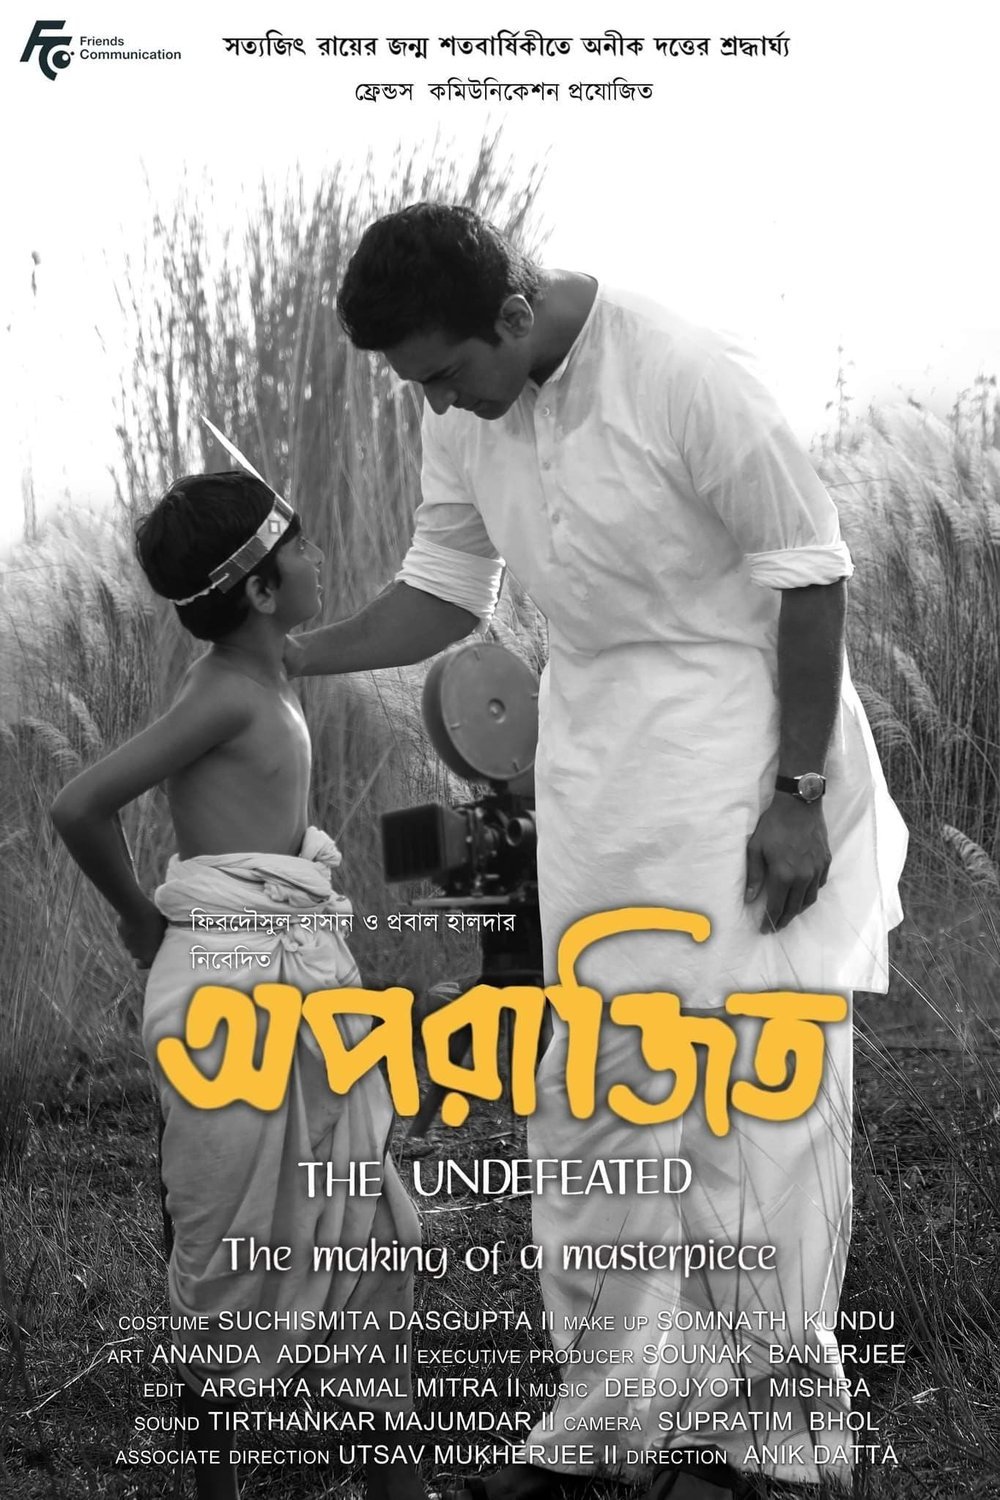 Bengali poster of the movie Aparajito (The Undefeated)